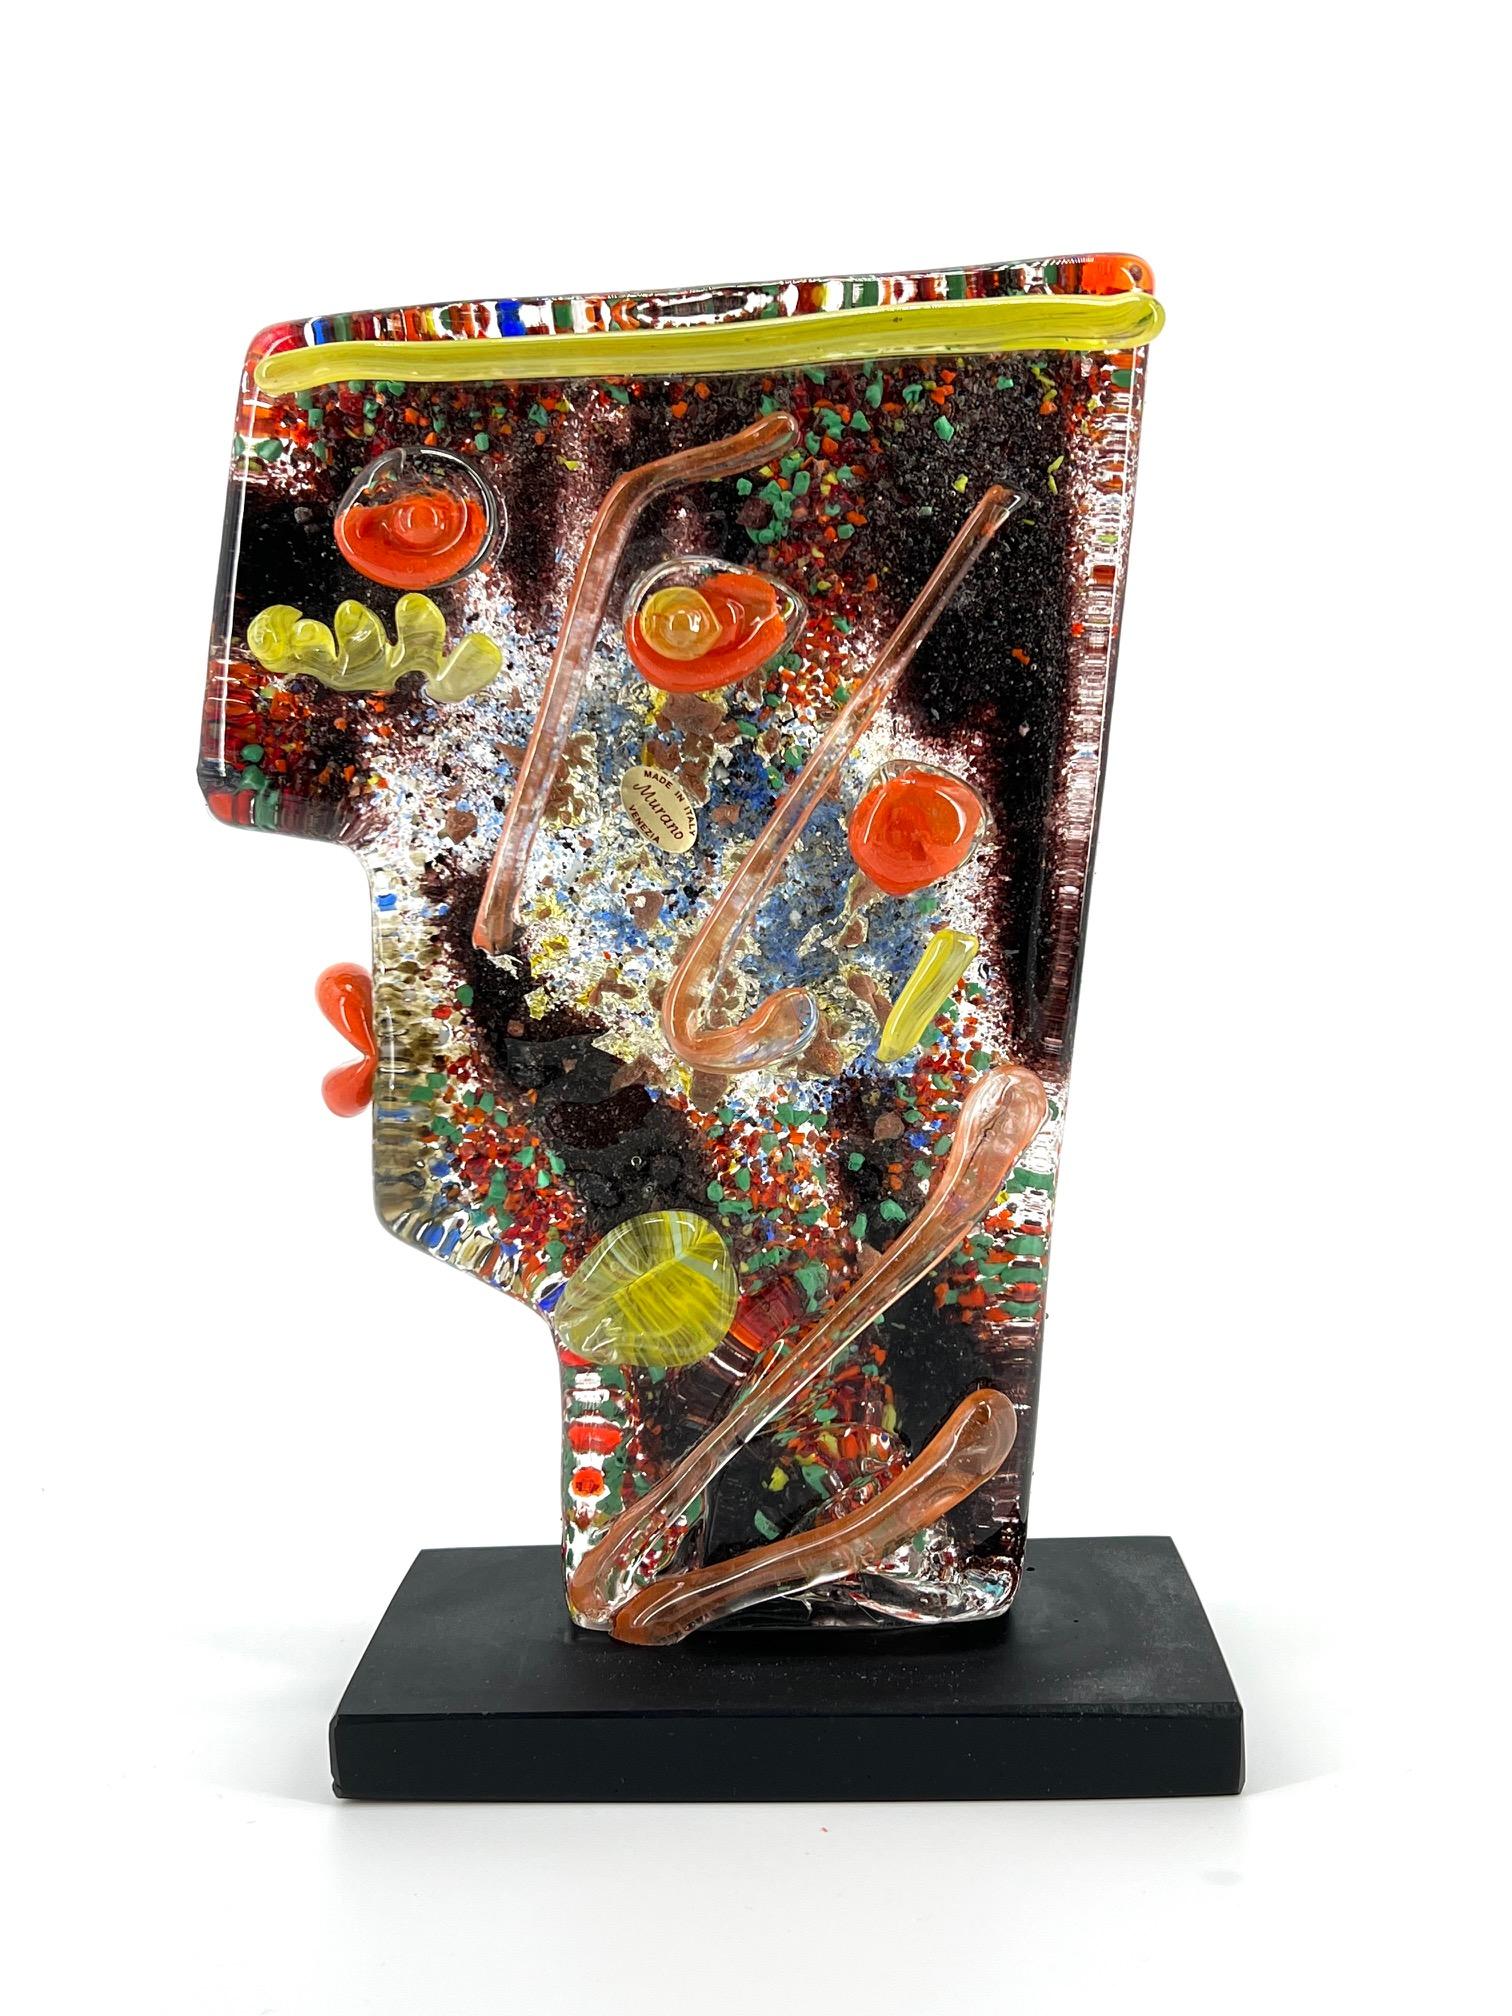 This unique hand-made glass sculpture is a tribute to Cubism and the great Pablo Picasso. Created by 1295 MURANO in its furnace workshop located in the Murano Island of Venice, this sculpture is a testament to the unmatched artistry and